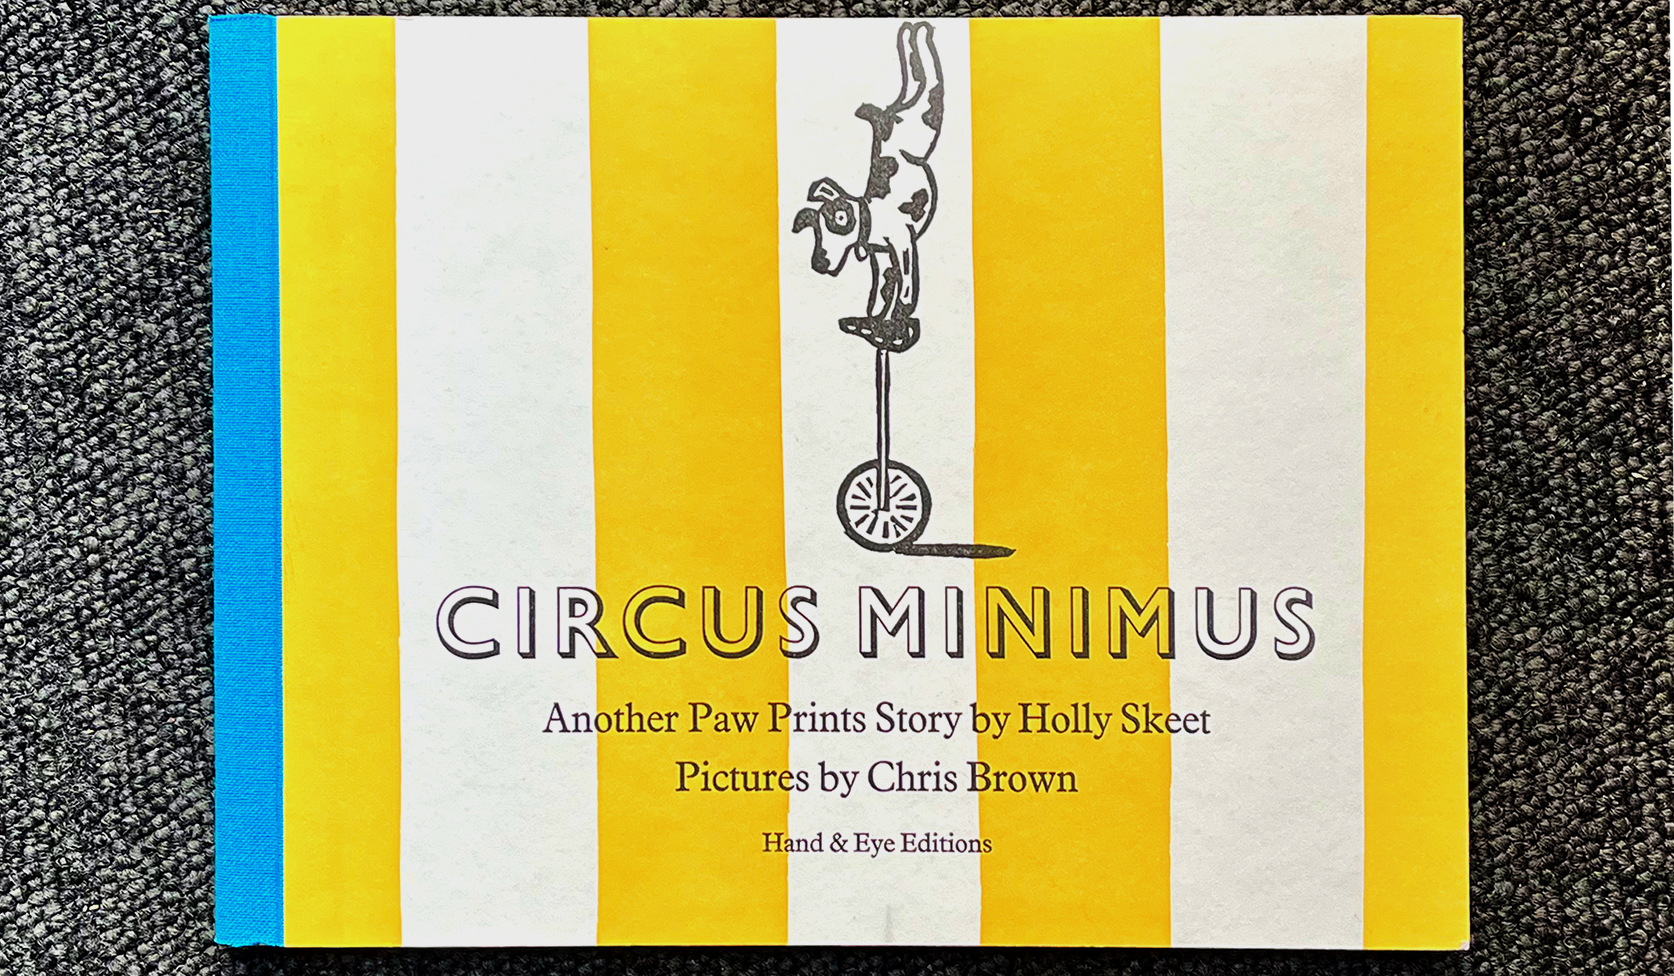 Circus Minimus by Holly Skeet, illustrated by Christopher Brown